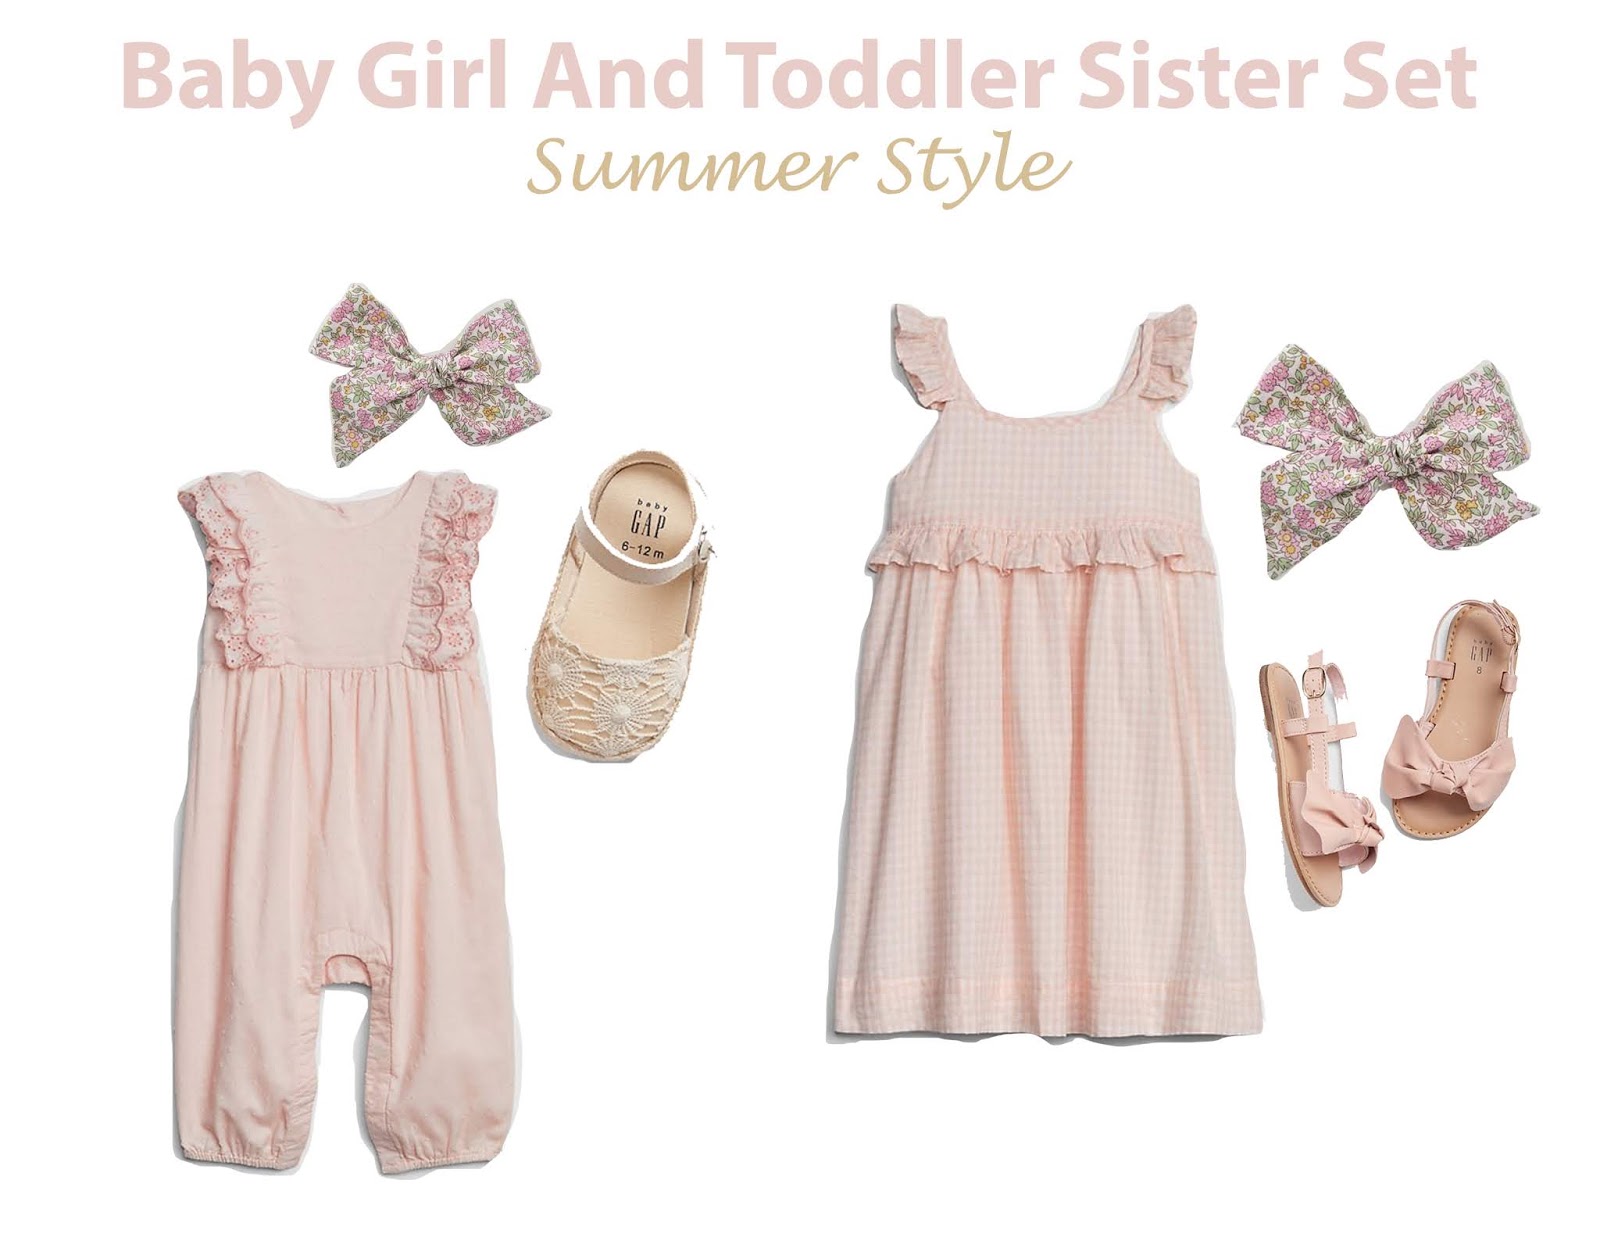 baby girl and toddler sister set outfit